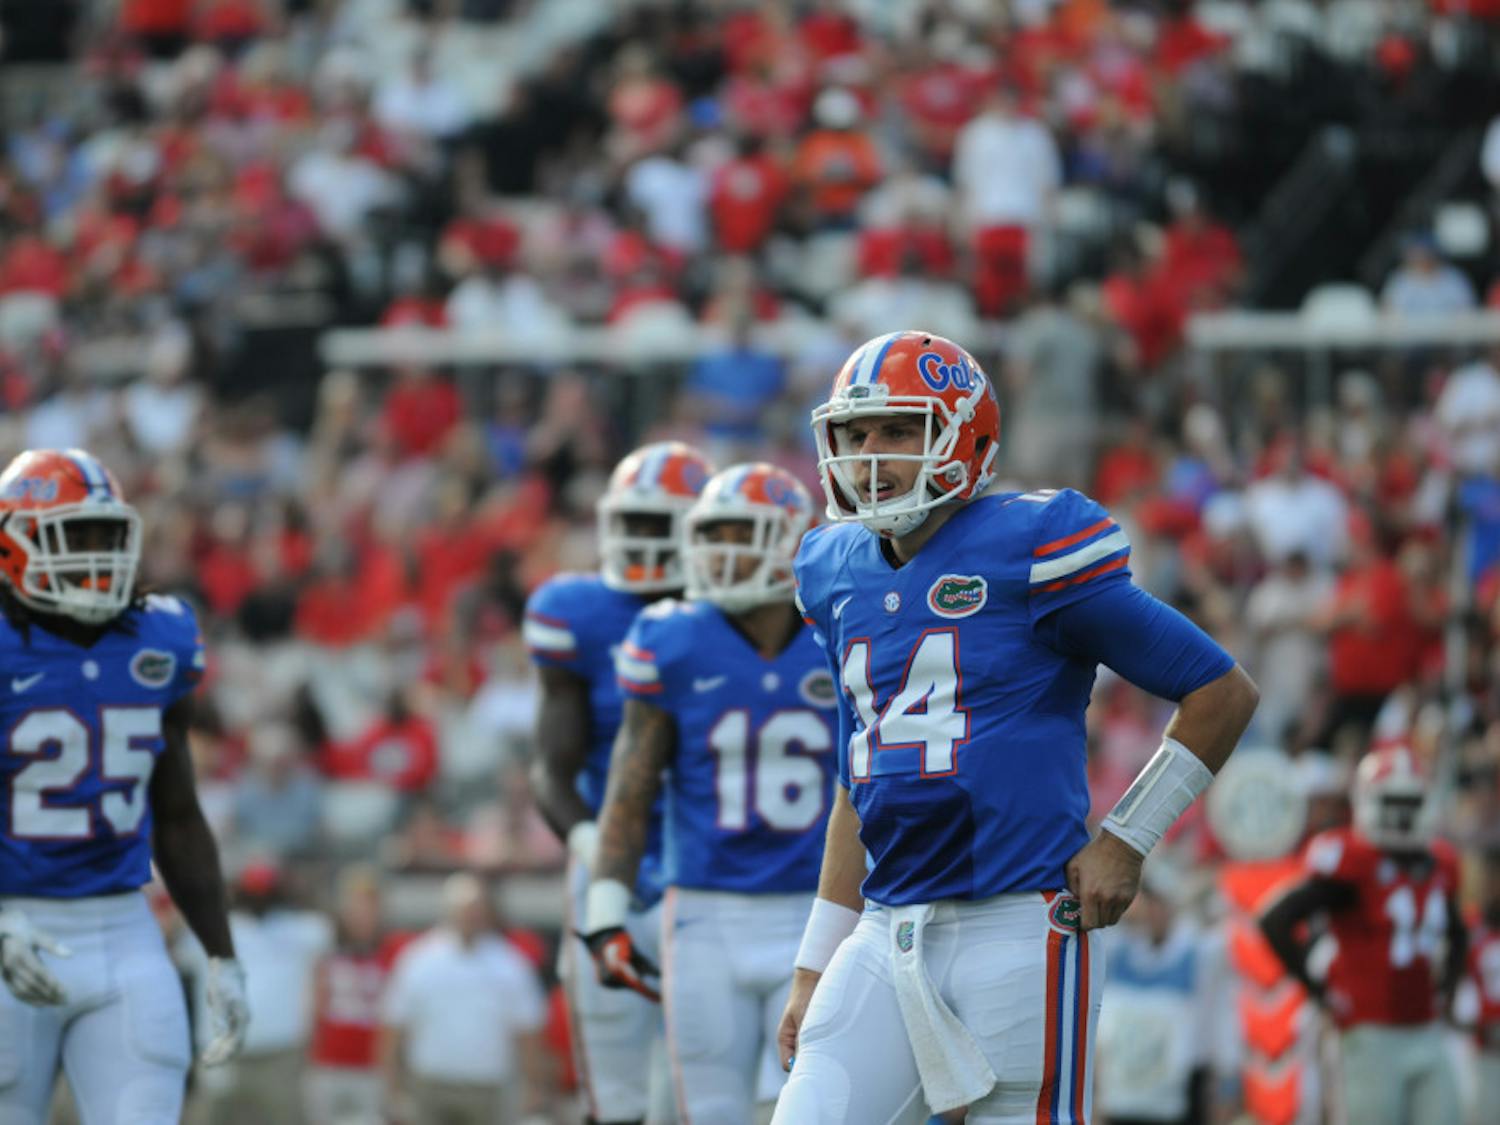 Luke Del Rio looks to the sideline for instruction during Florida's 24-10 win over Georgia on Oct. 29, 2016, in Jacksonville.